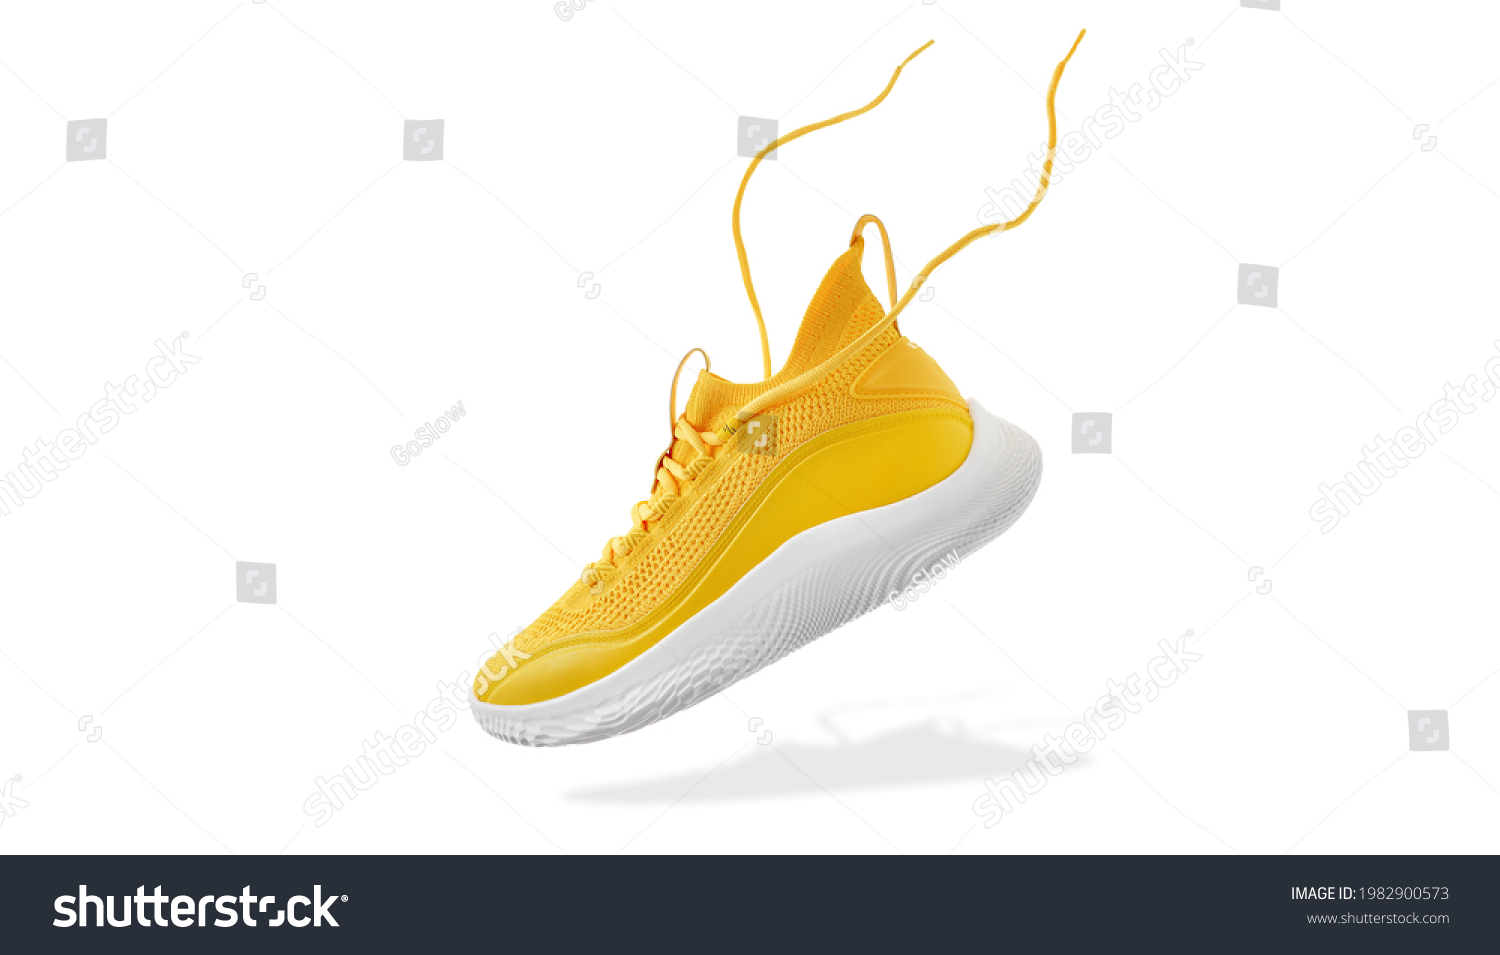 Flying yellow leather womens sneaker isolated on white background. Fashionable stylish sports casual shoes. Creative minimalistic layout with footwear. Mock up for design advertising for shoe store #1982900573